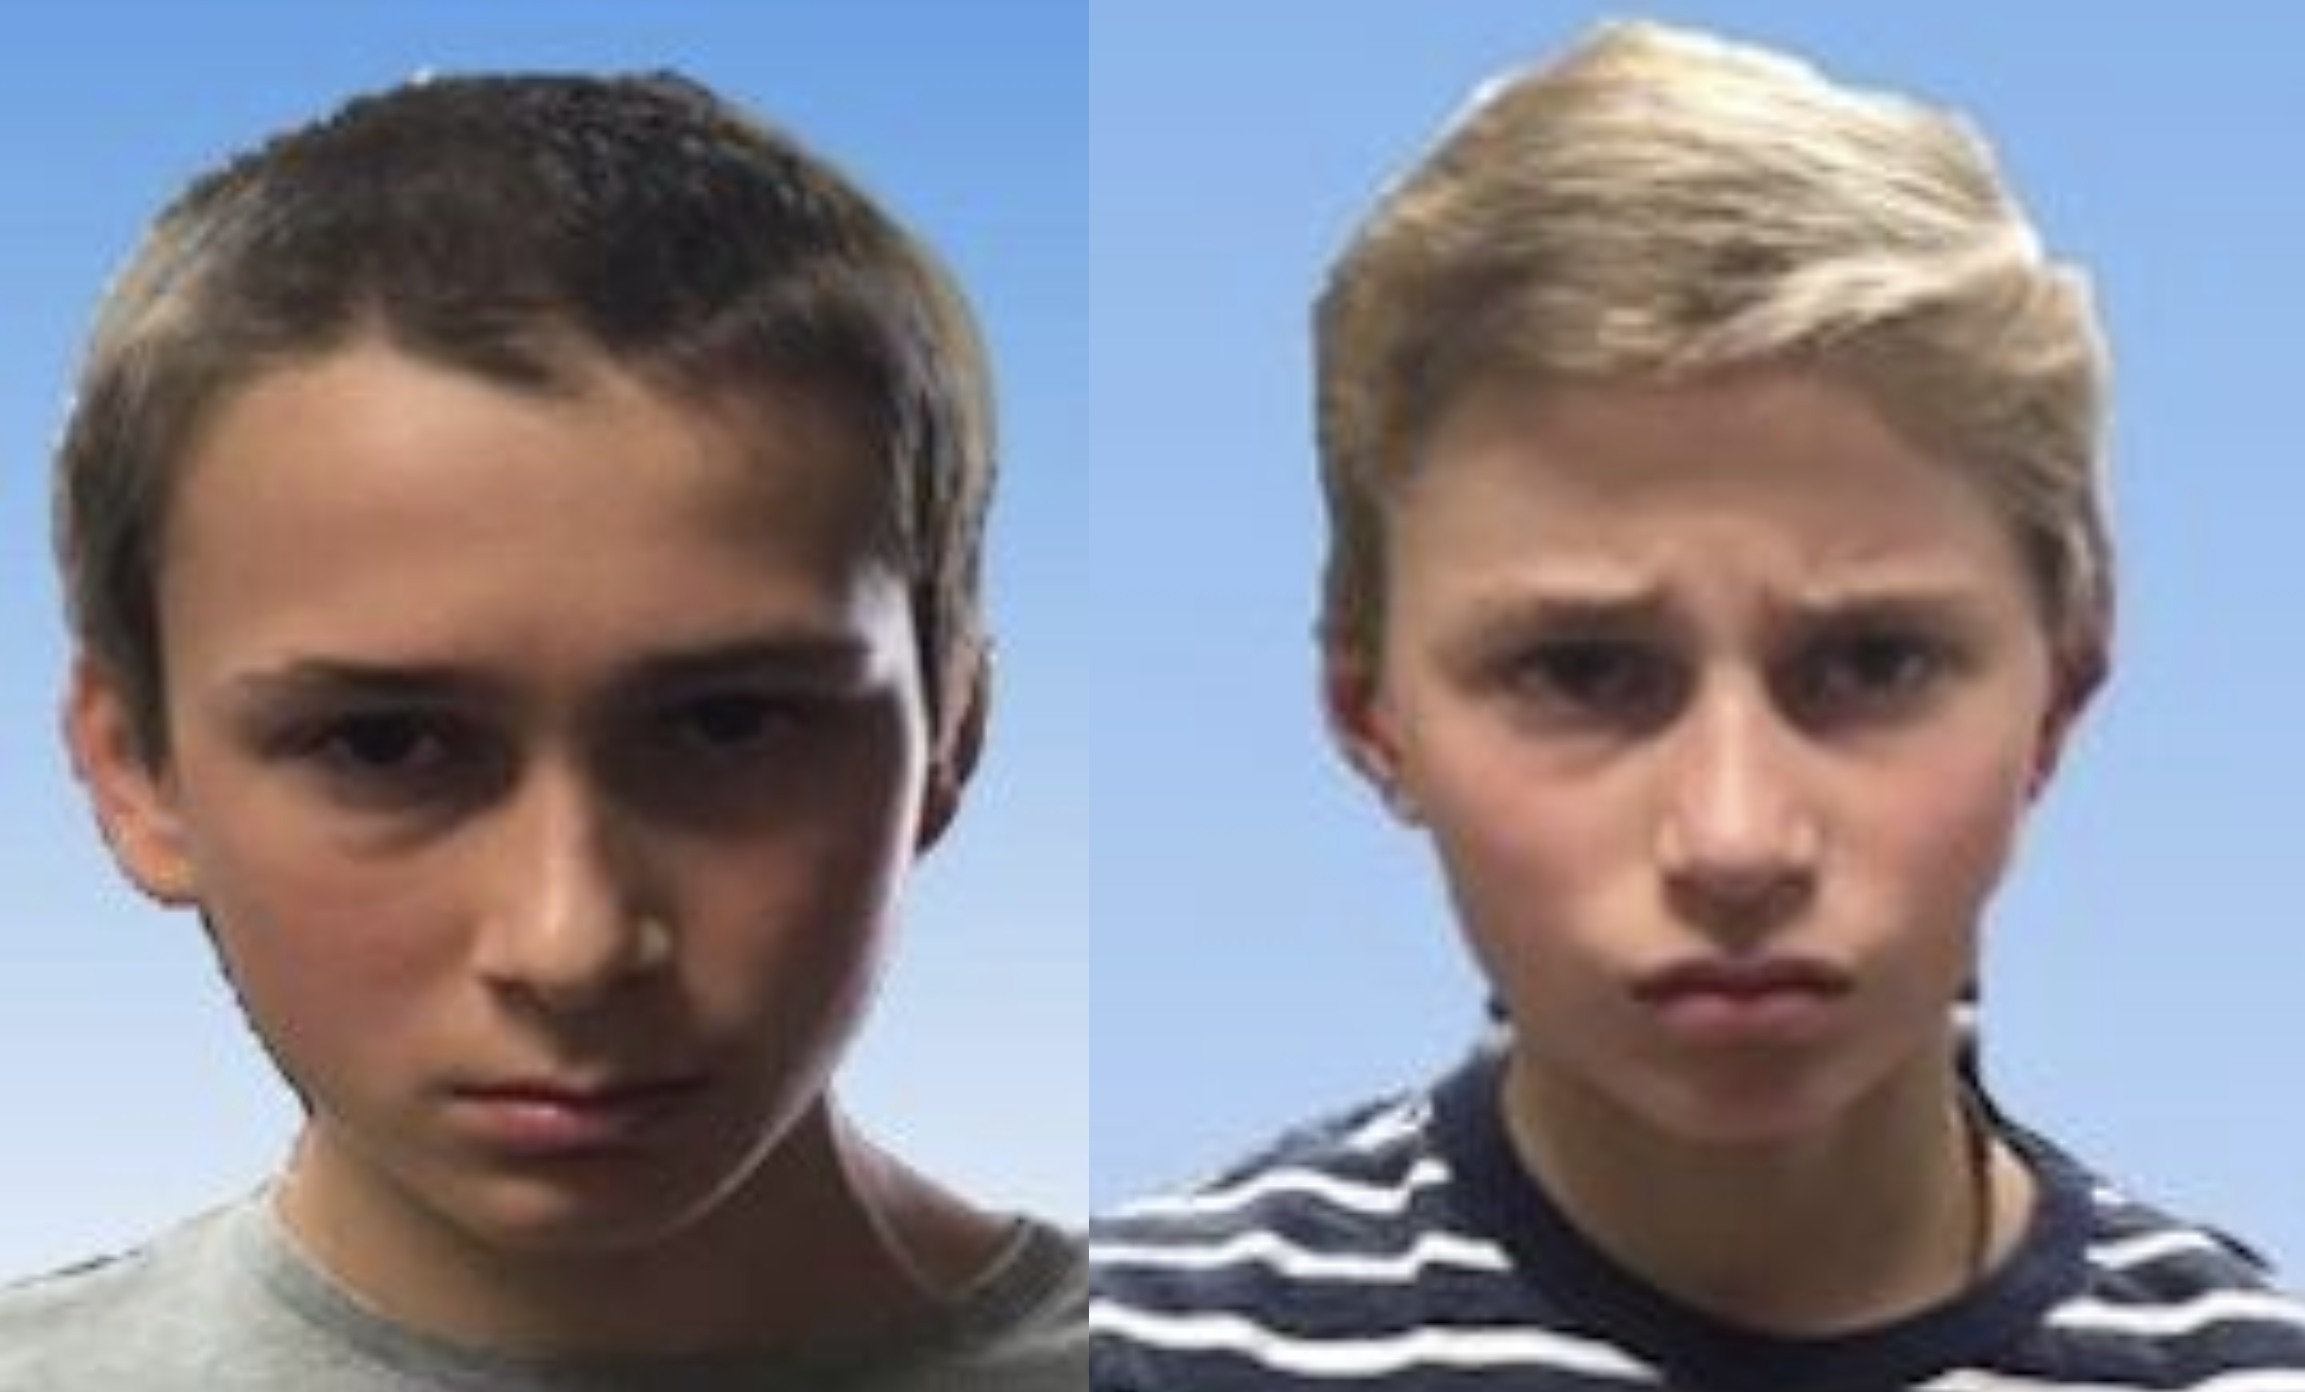 UPDATE: 2 missing boys from St. Clair County found safe